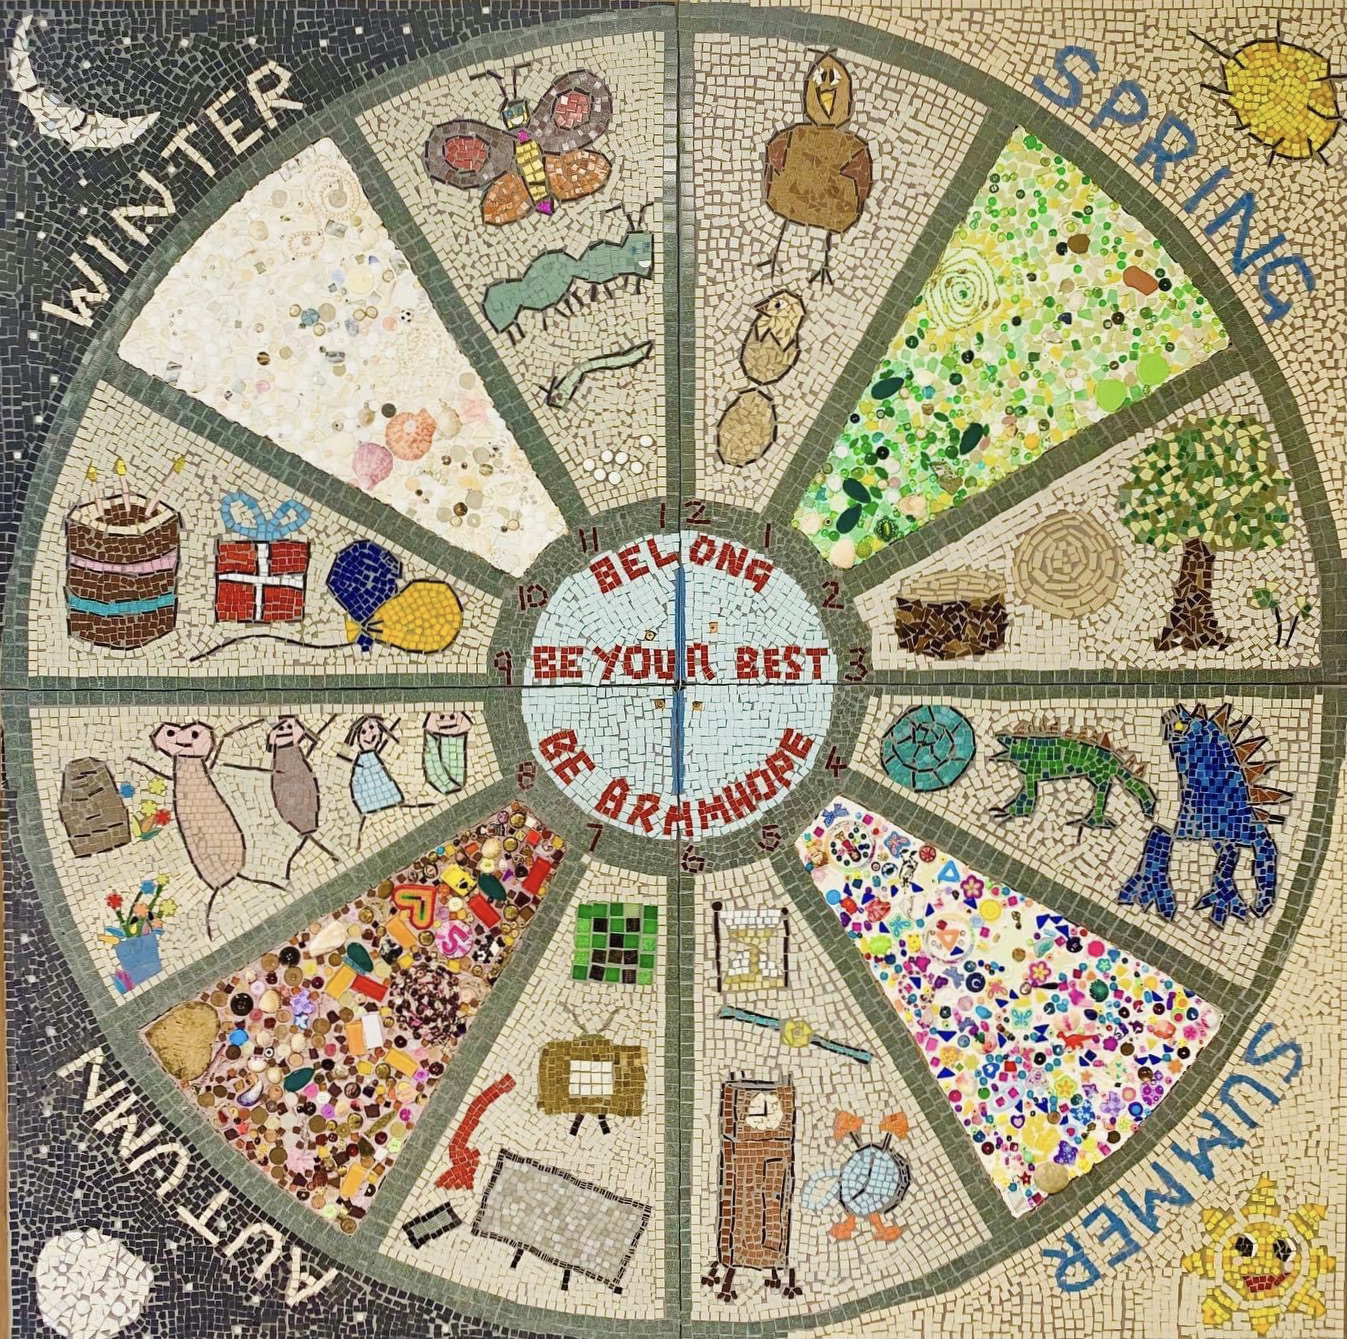 'Time' Primary School mosaic project